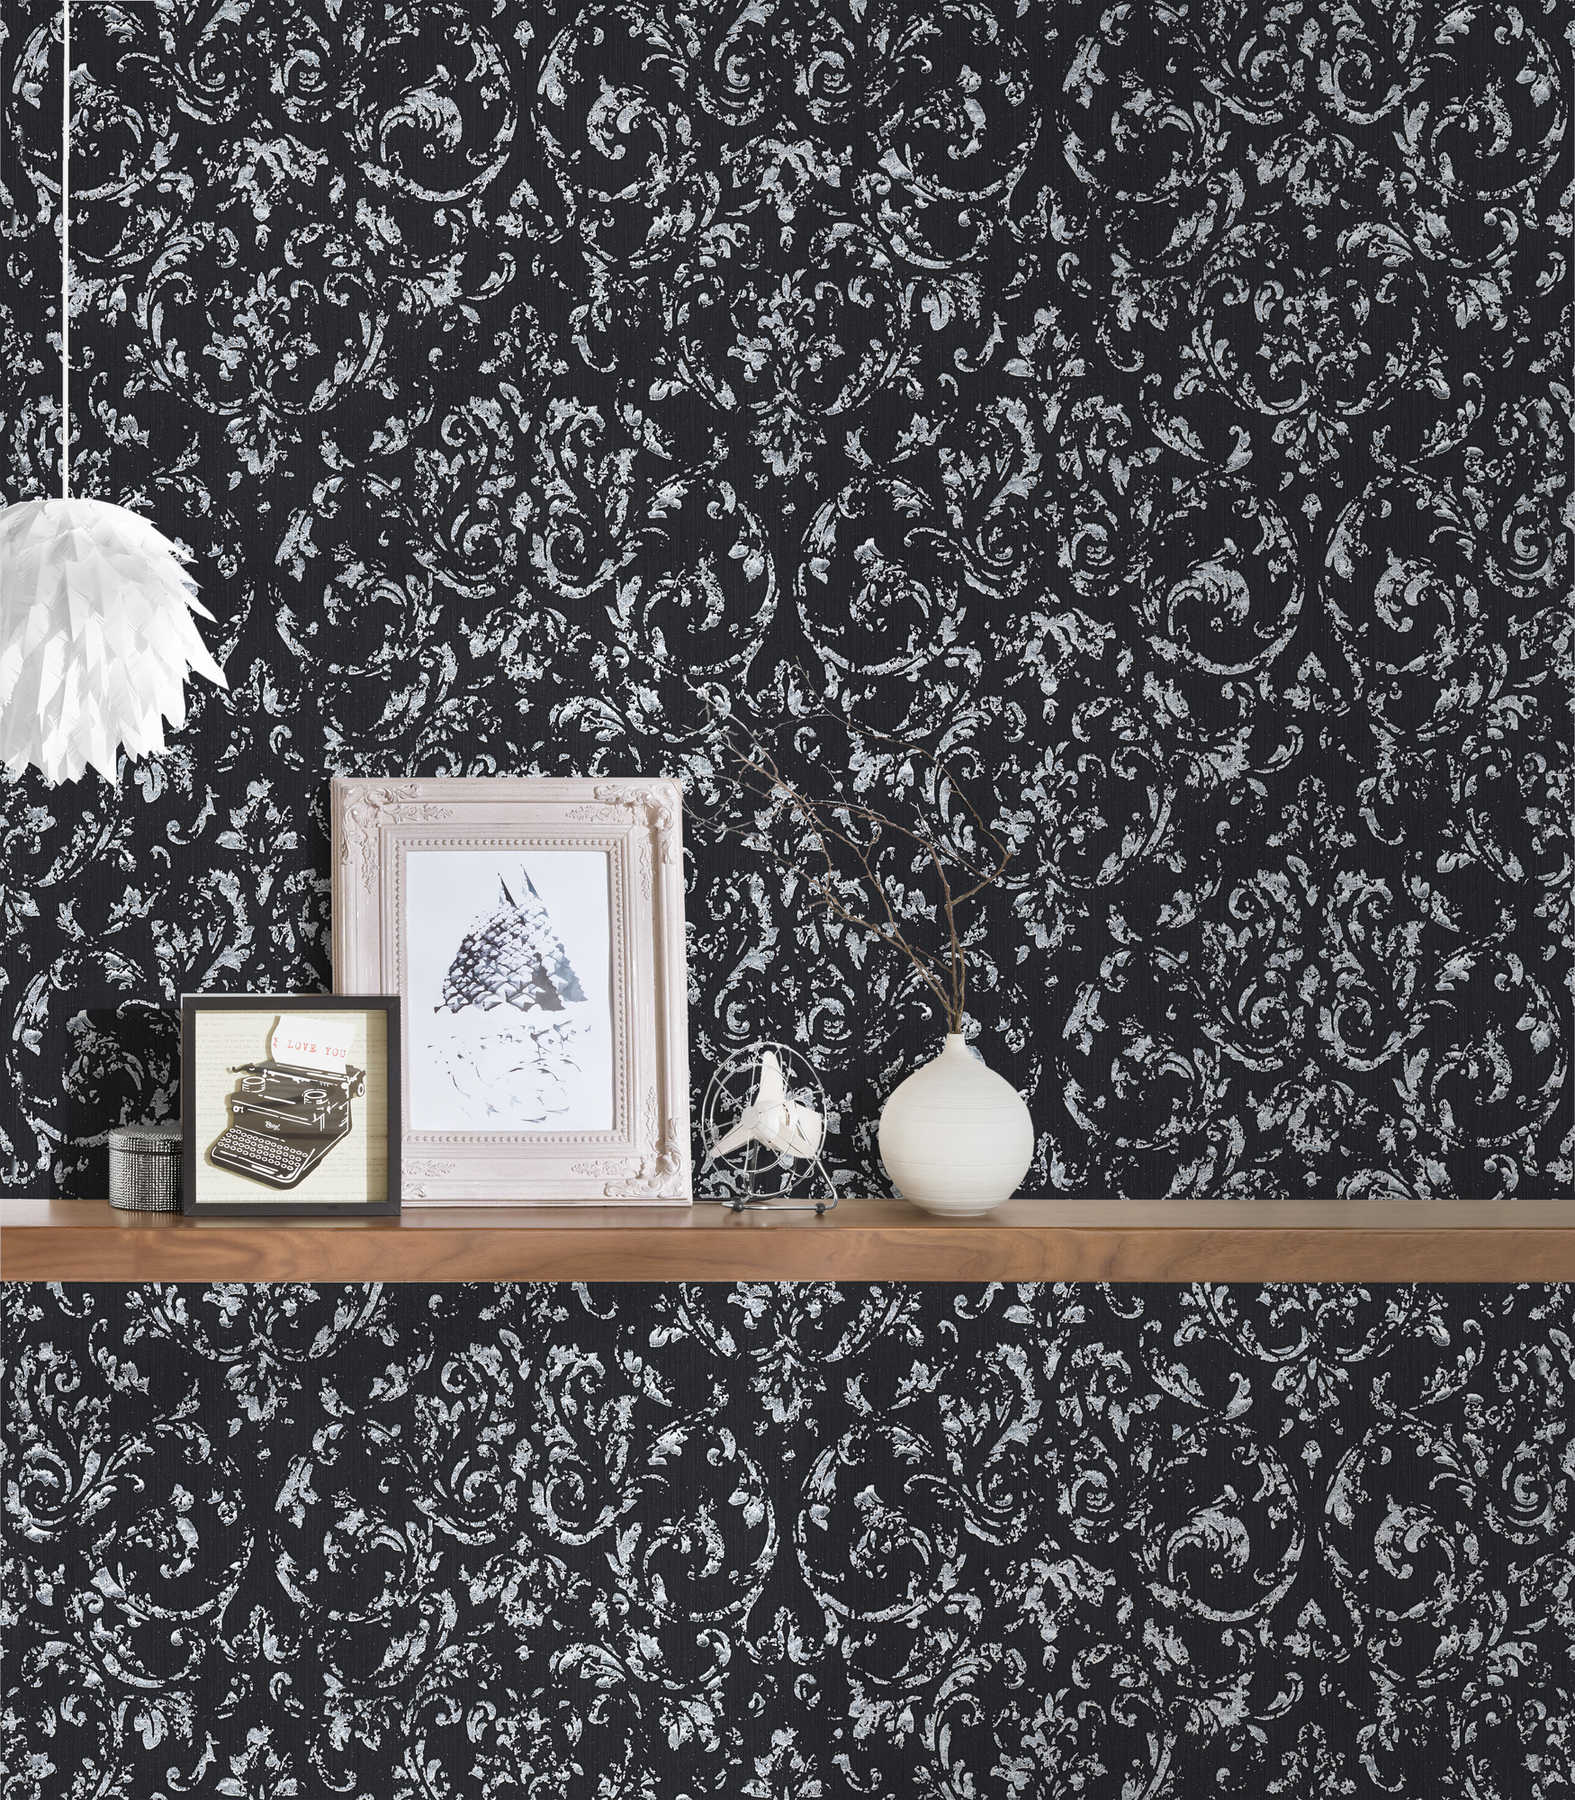             Wallpaper with silver ornaments in used look - black, silver
        